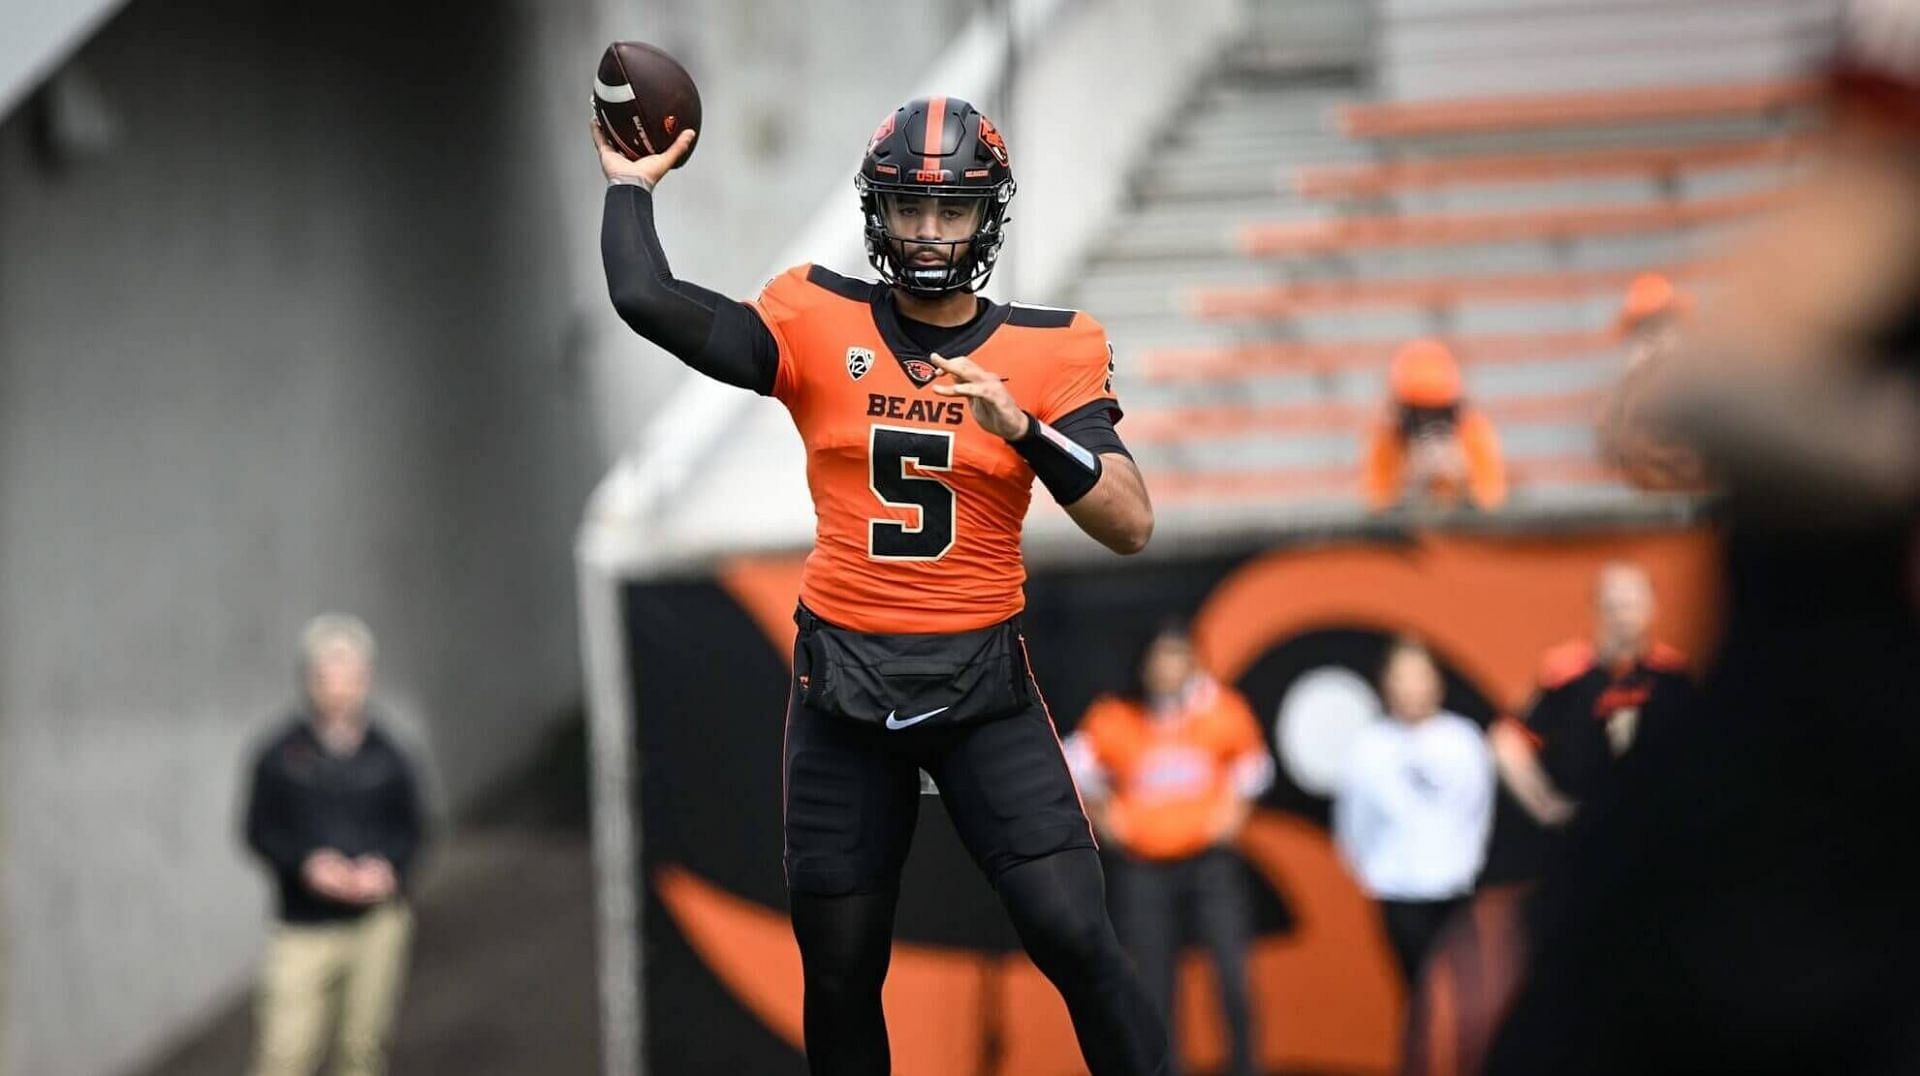 Why did DJ Uigalelei leave Clemson for Oregon State? 